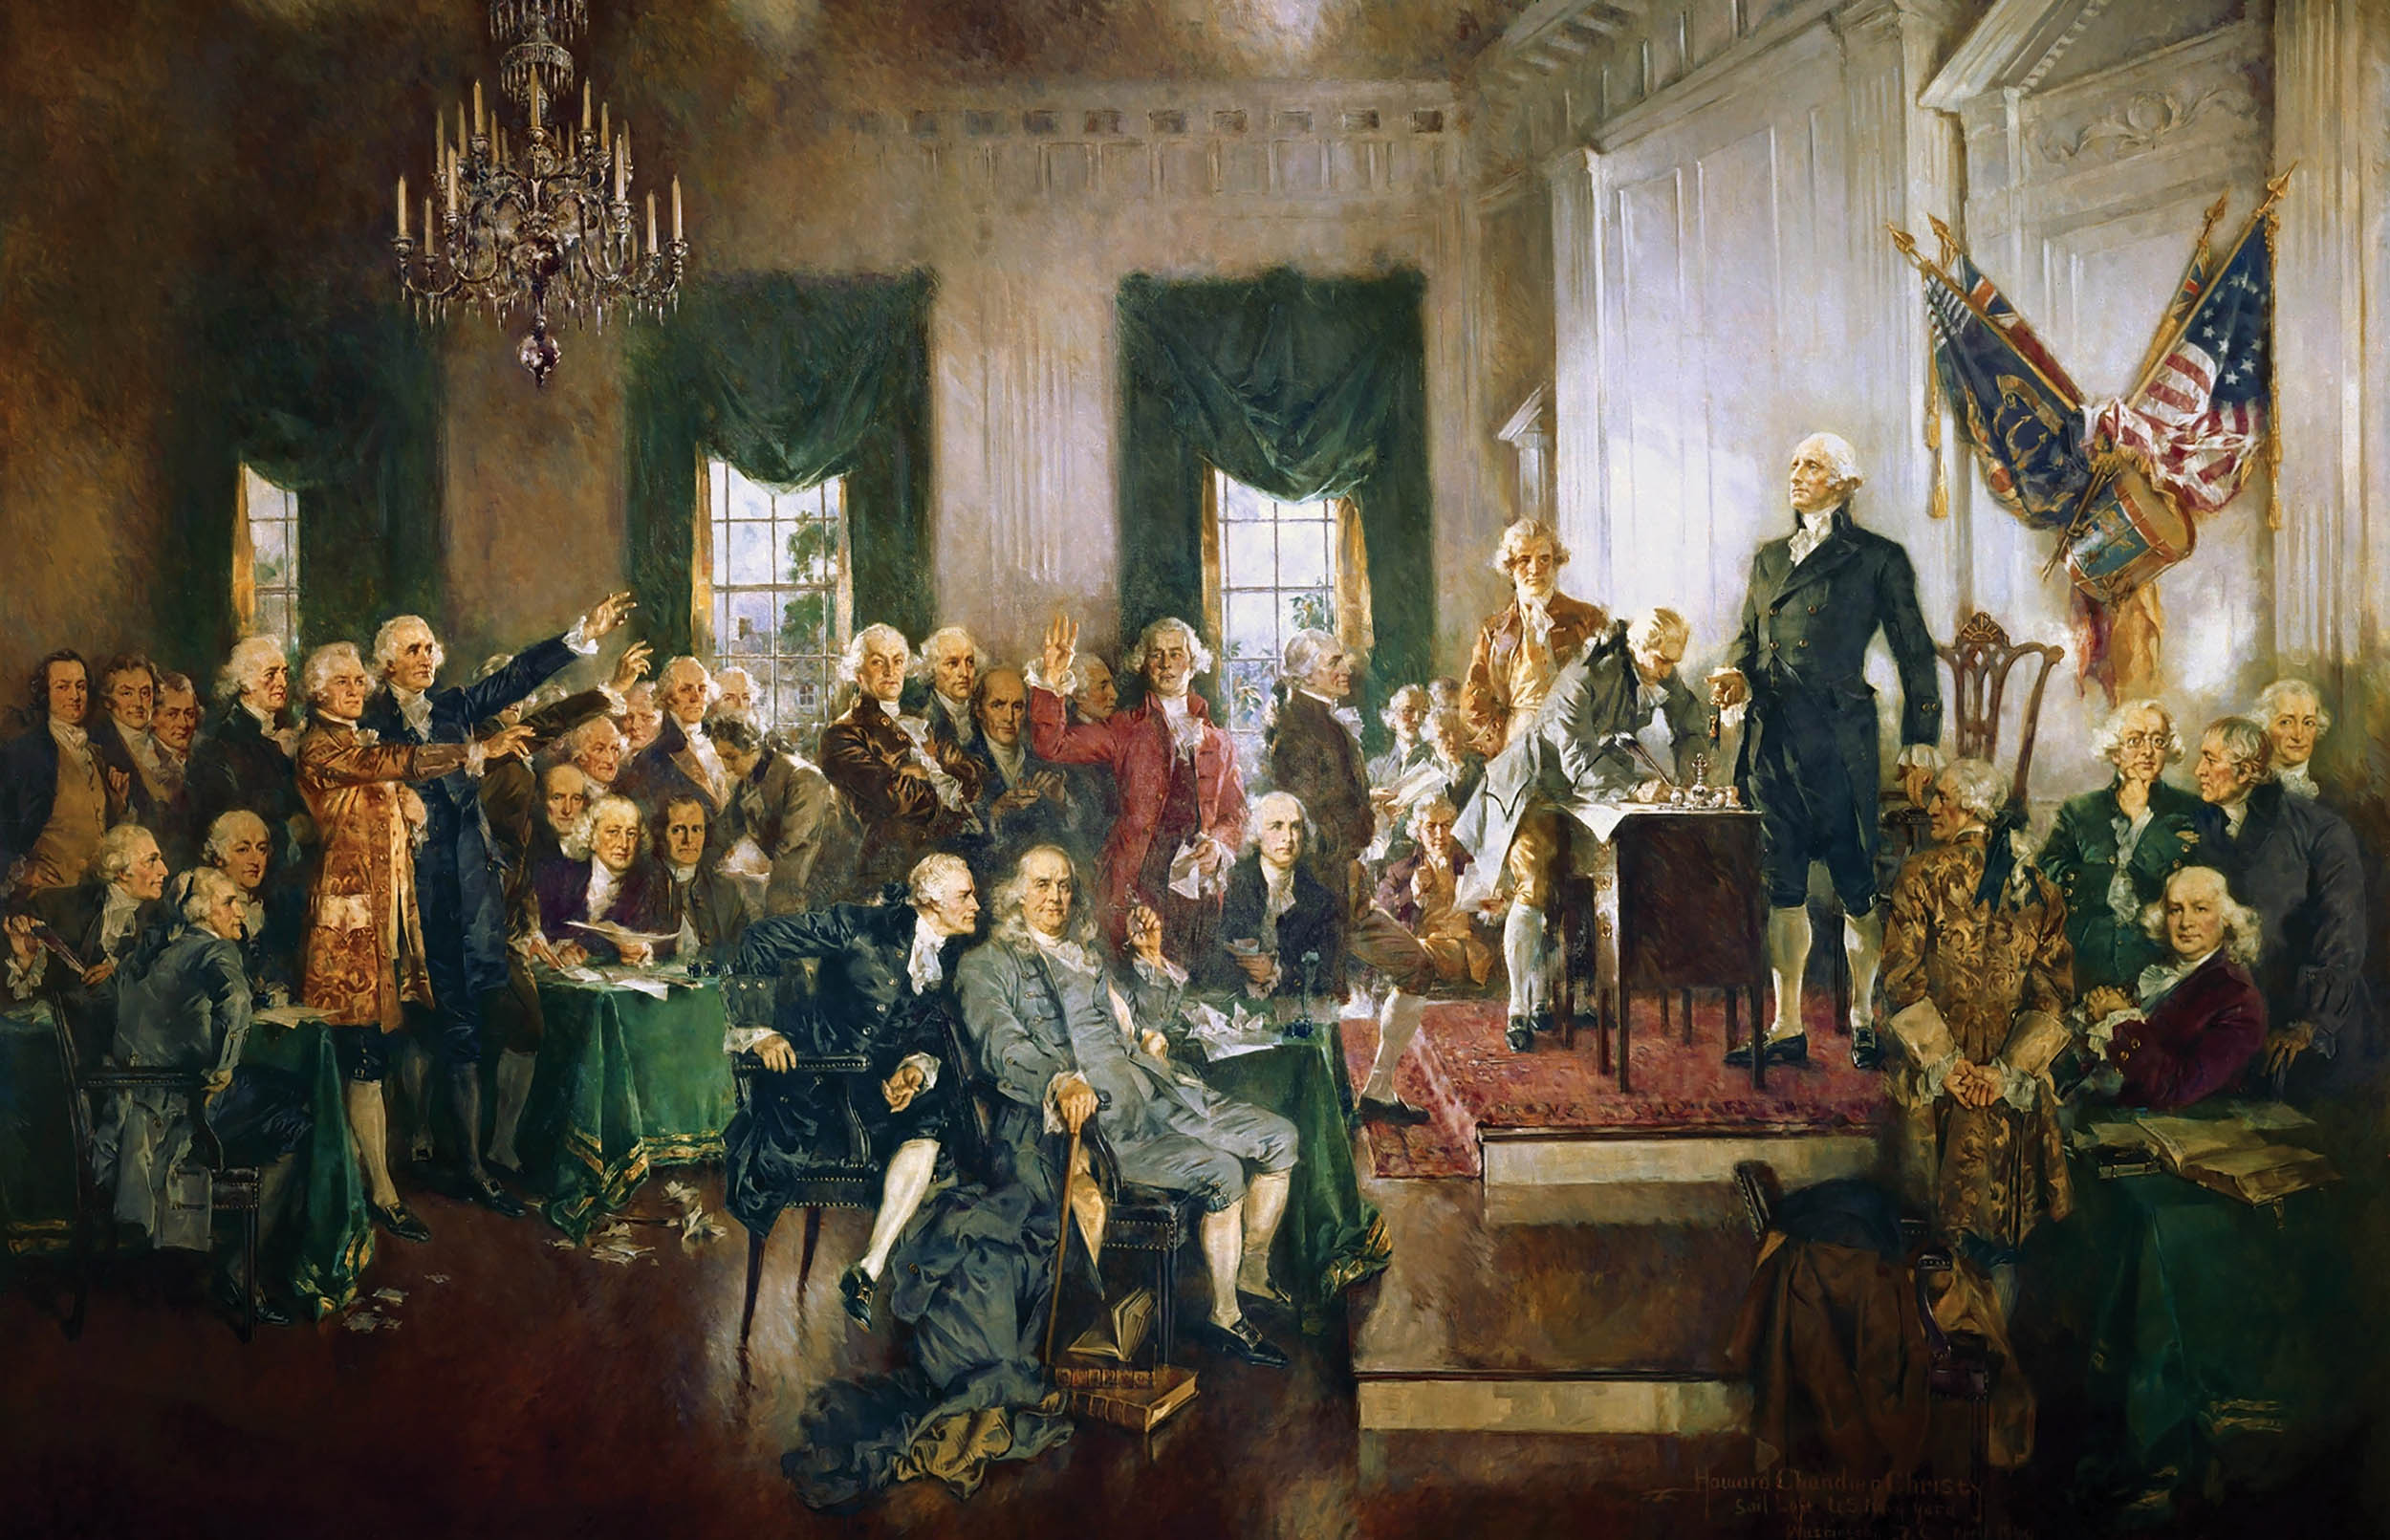 Scene at the Signing of the Constitution of the United States, by Howard Chandler Christy, 1940, oil on canvas, U.S. Capitol